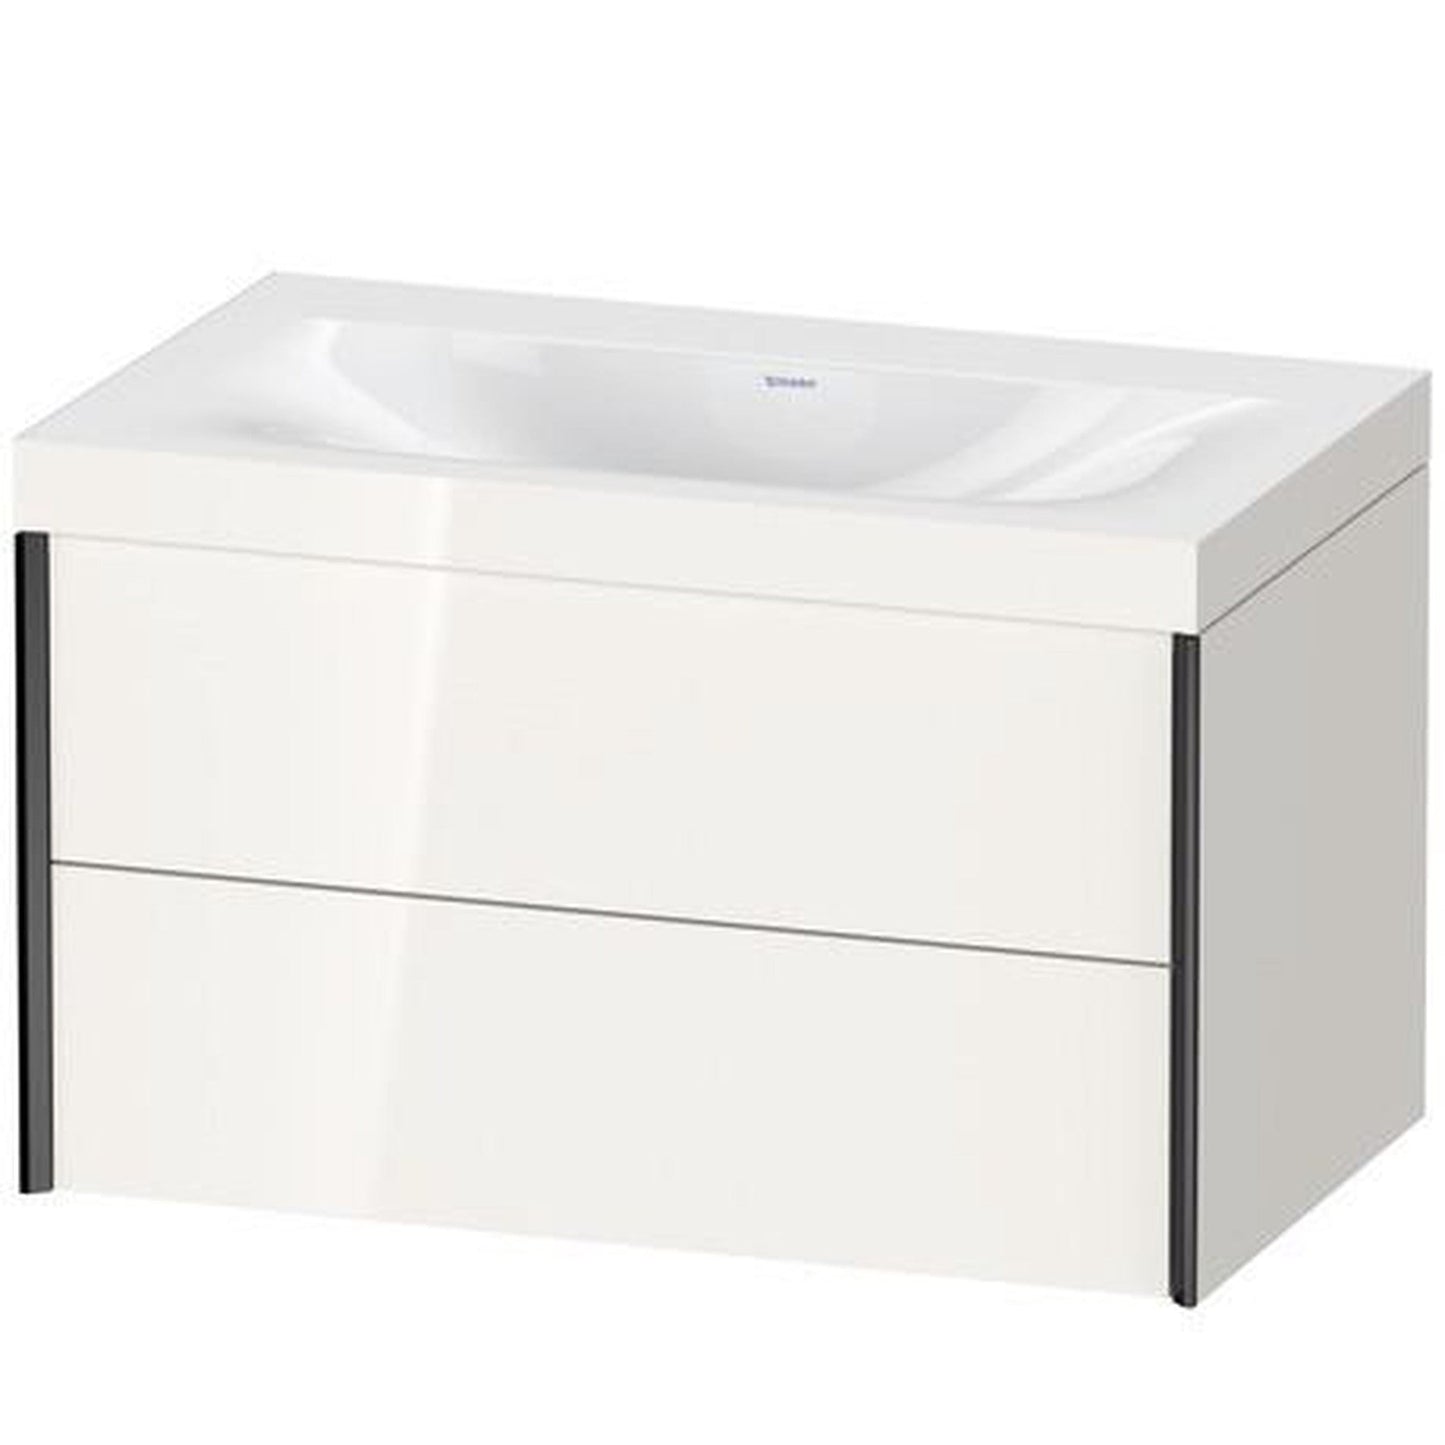 Duravit Xviu 31" x 20" x 19" Two Drawer C-Bonded Wall-Mount Vanity Kit Without Tap Hole, White (XV4615NB222C)